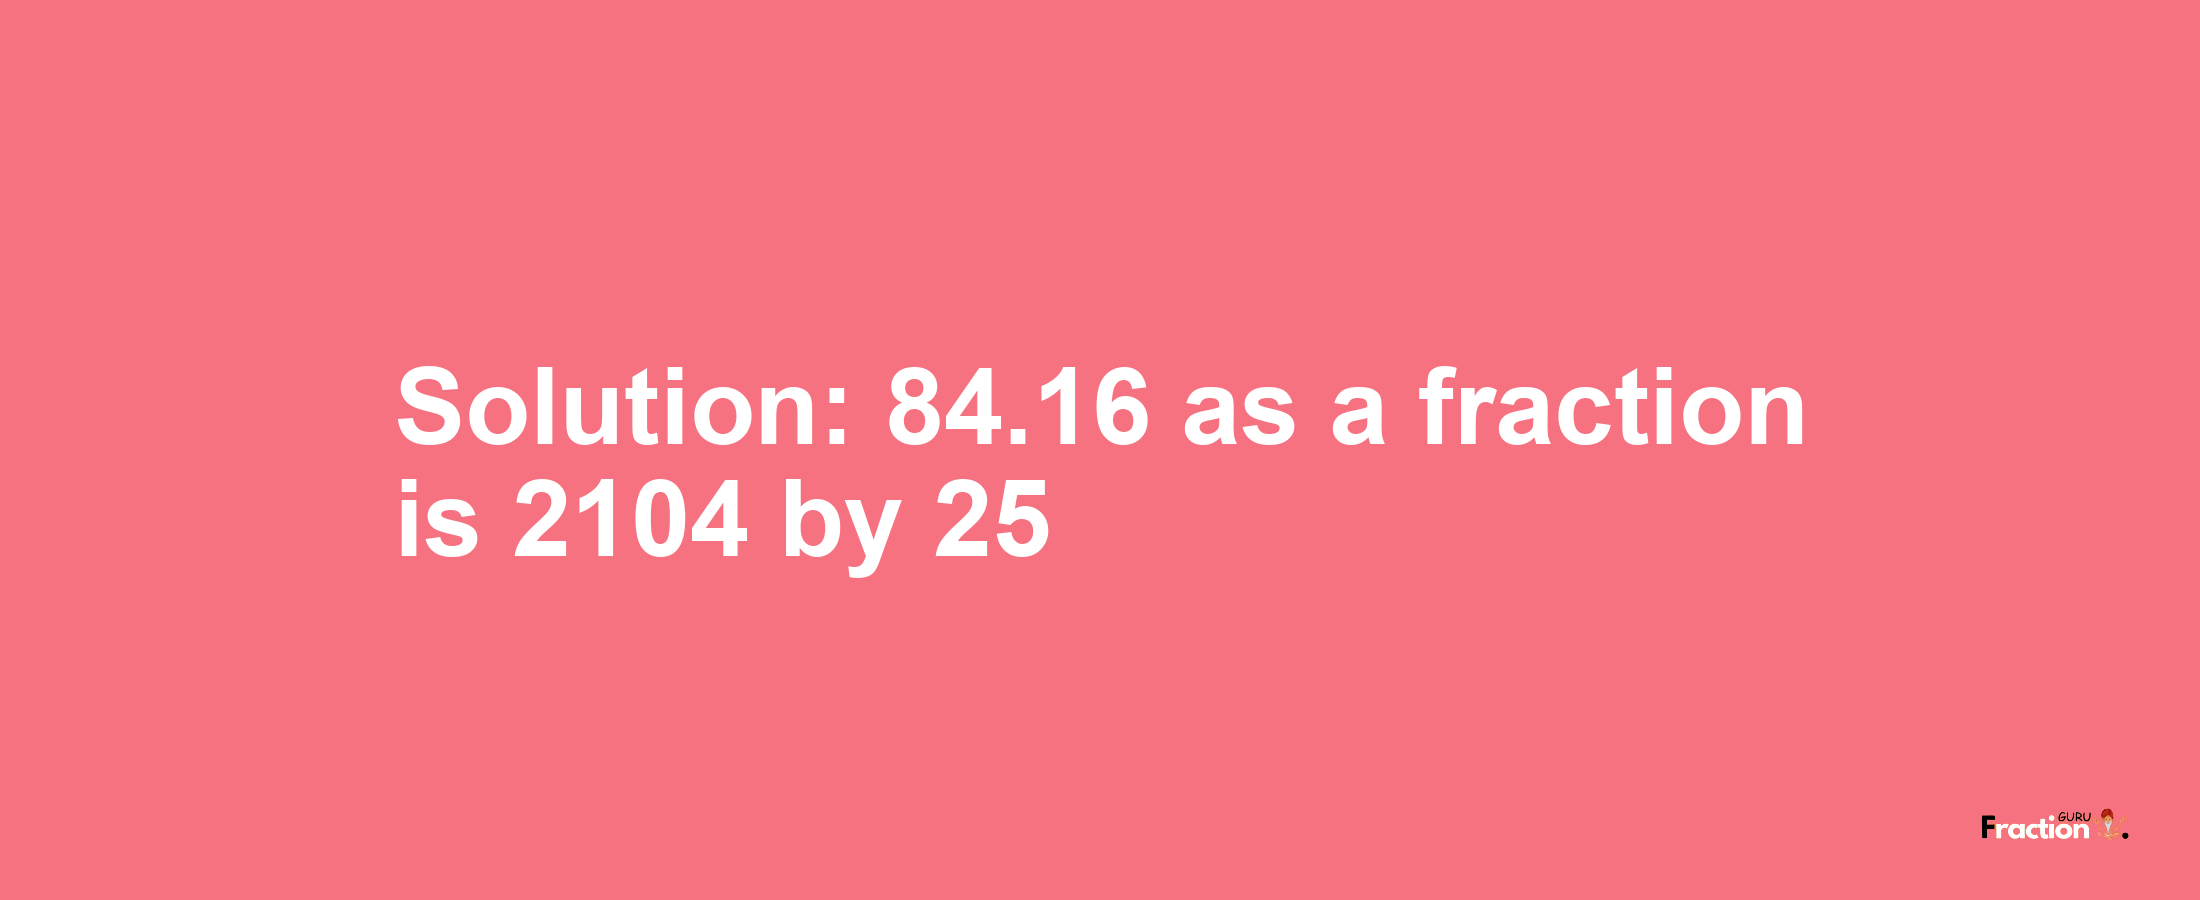 Solution:84.16 as a fraction is 2104/25